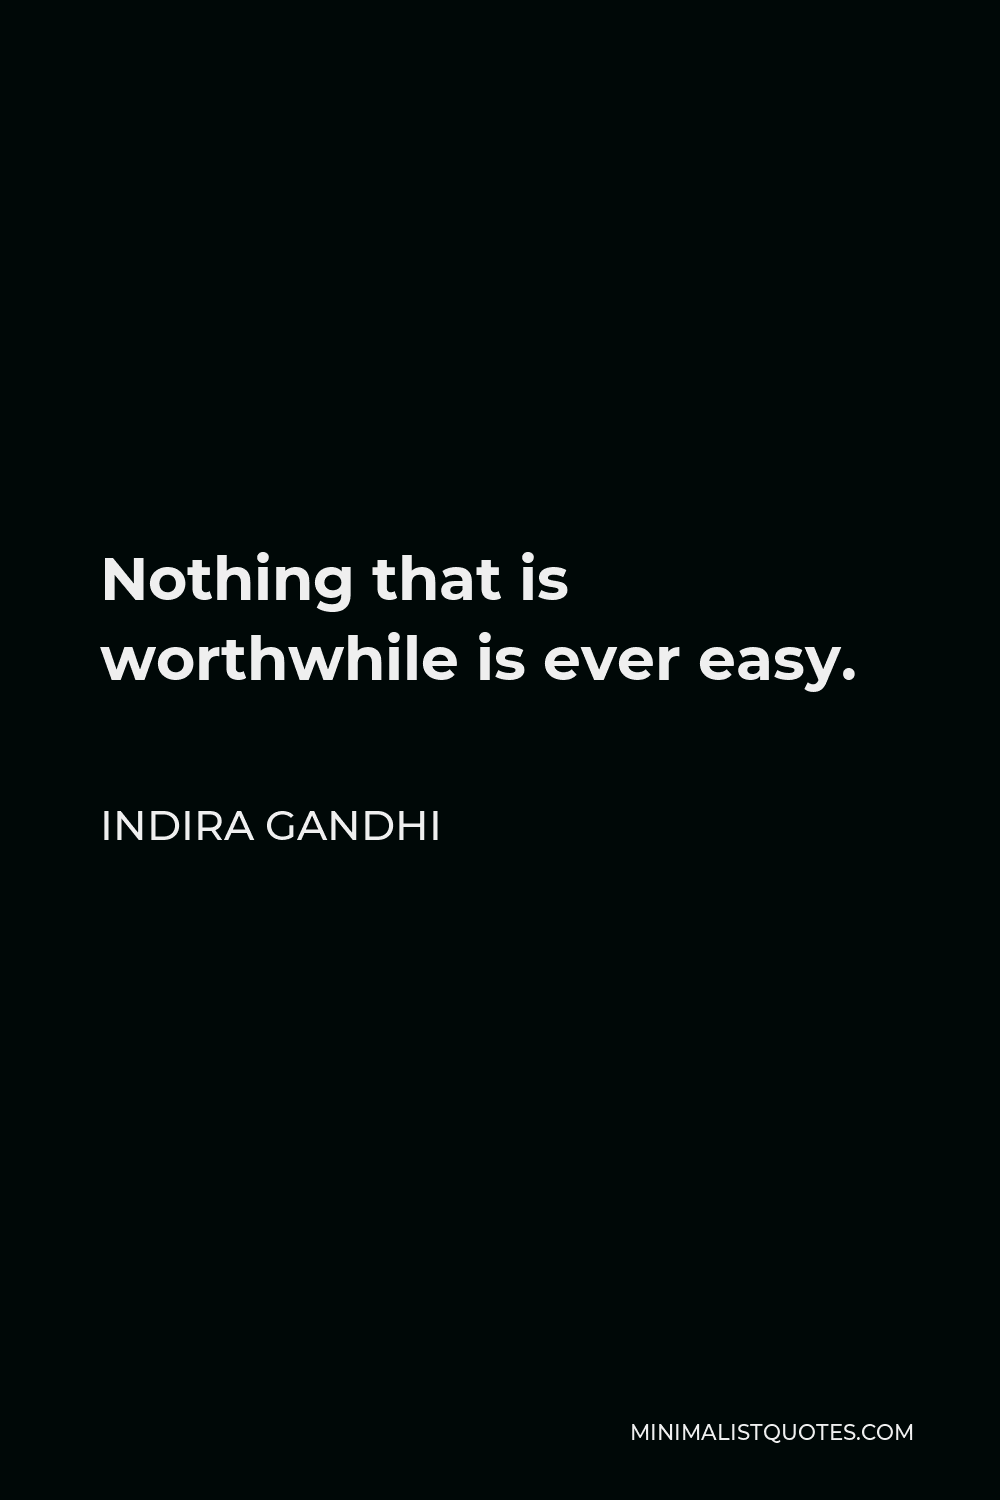 Indira Gandhi Quote - Nothing that is worthwhile is ever easy.